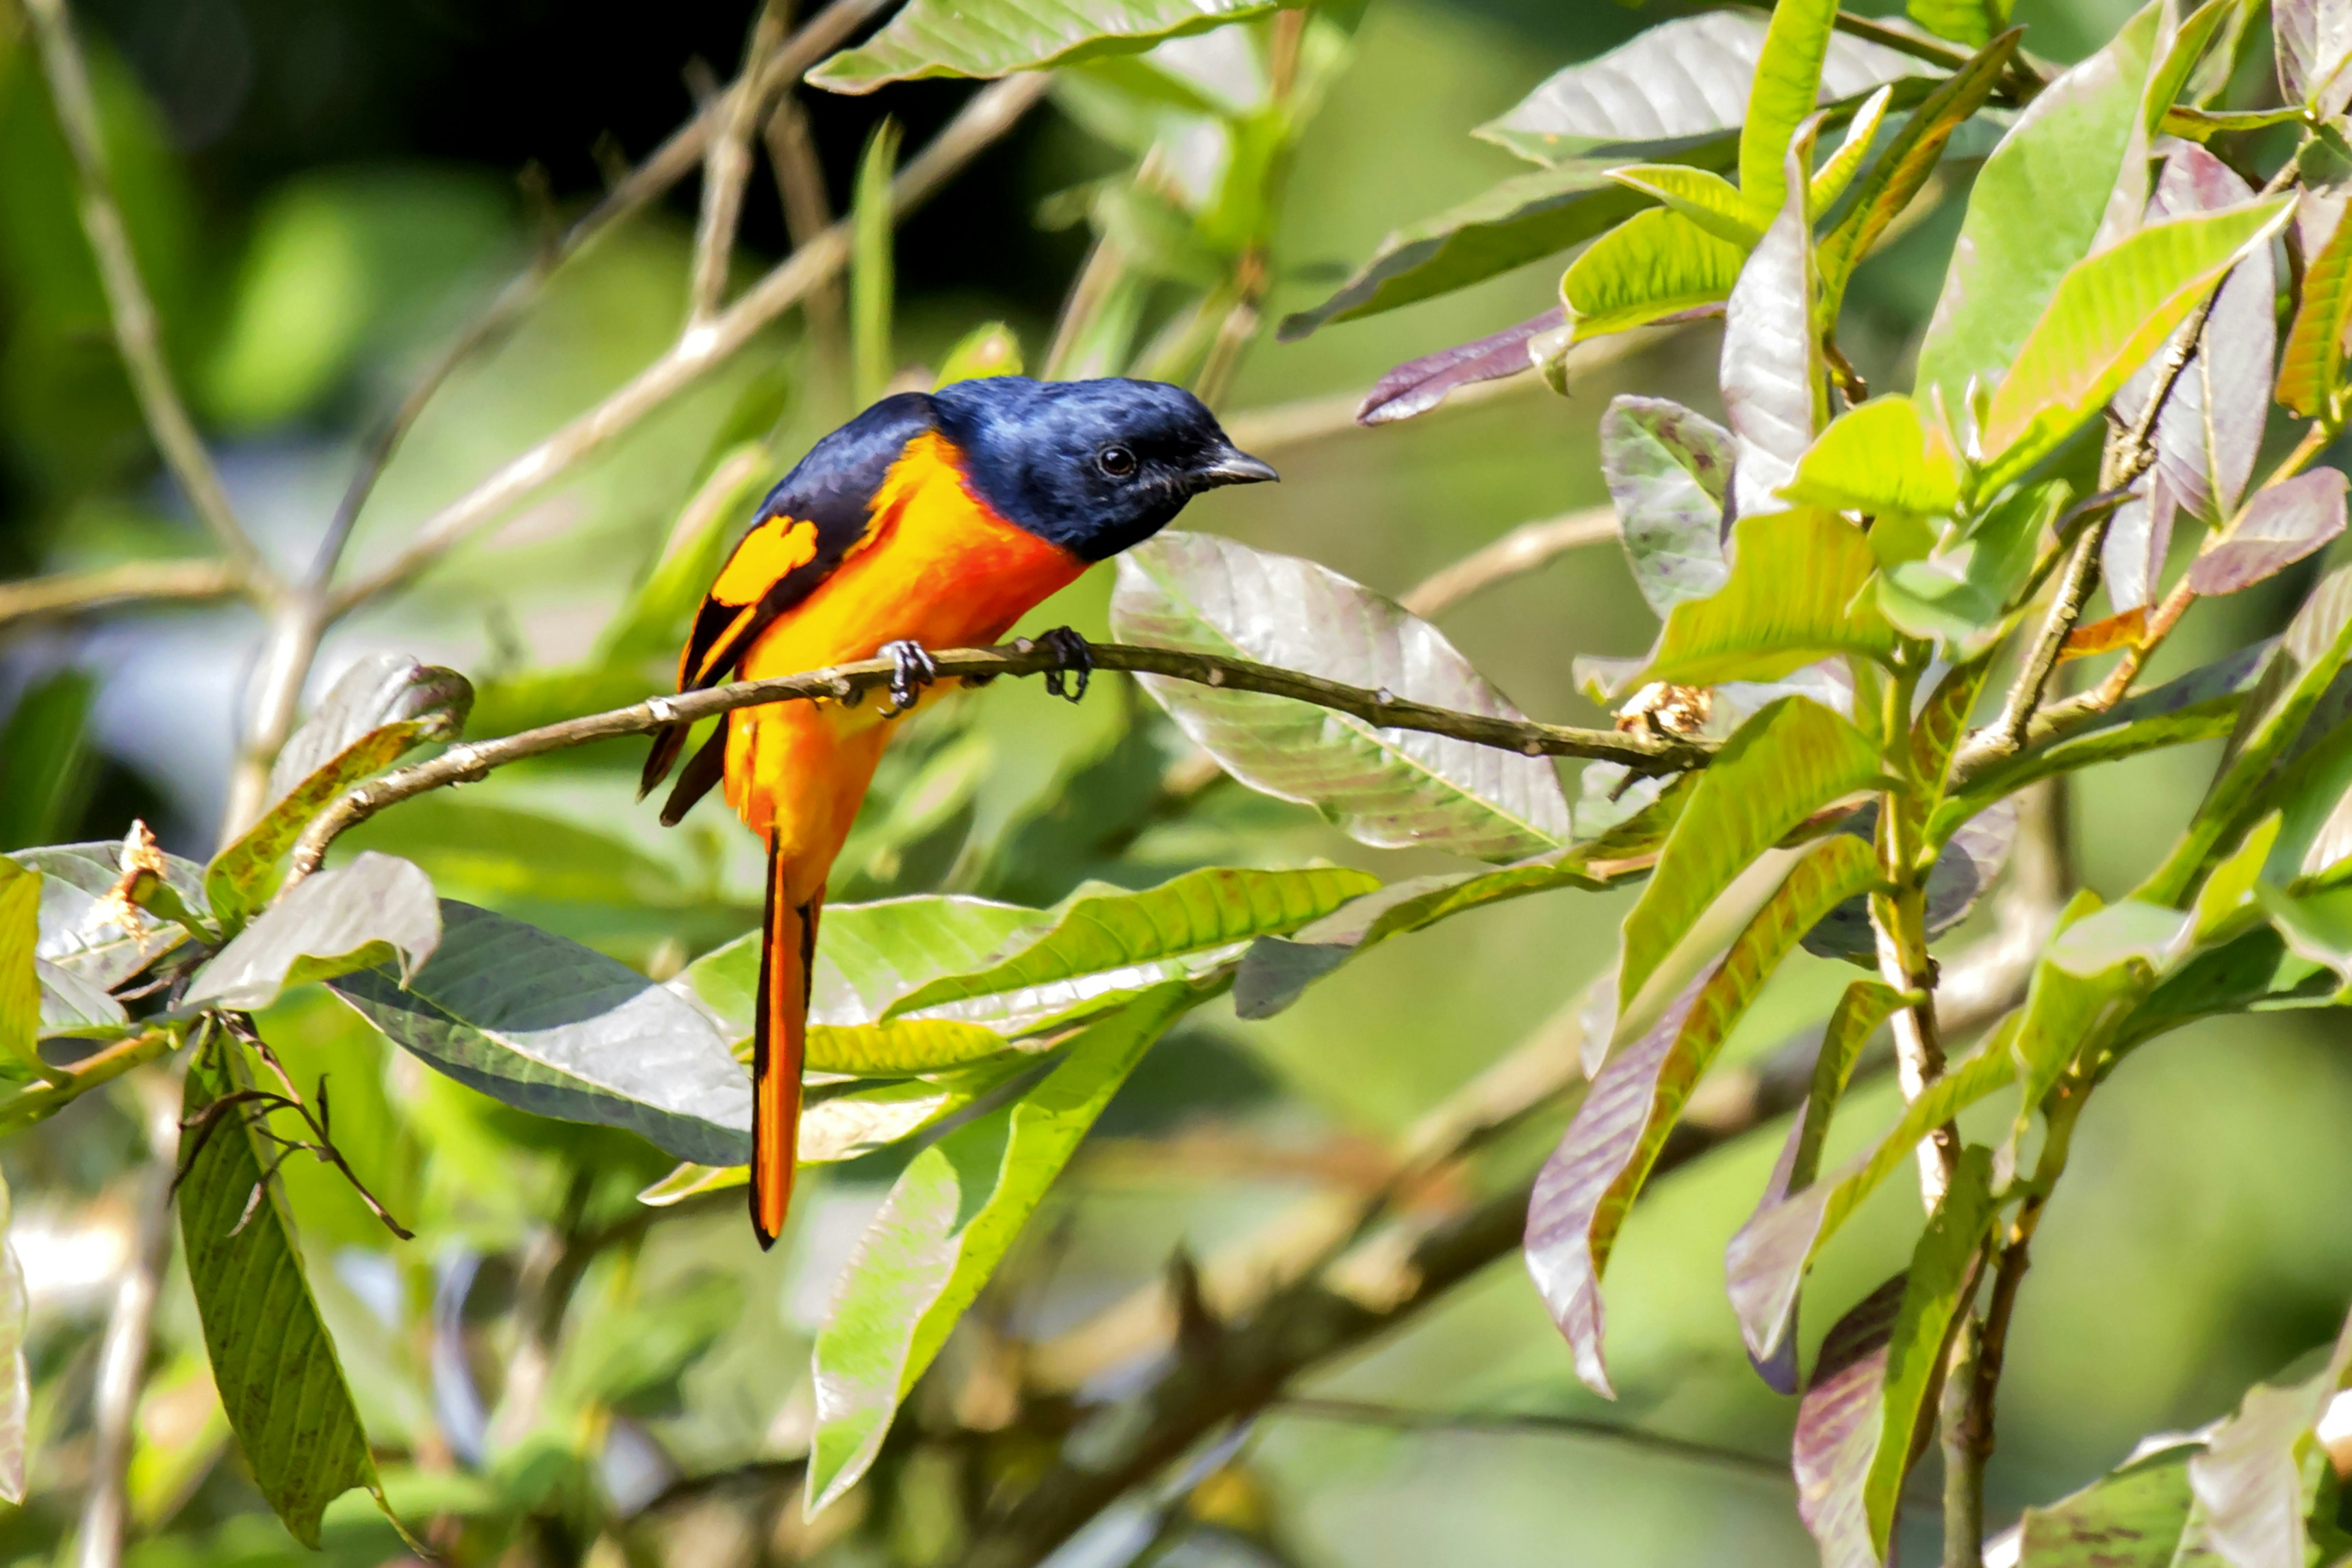 The Scarlet Minivet (Pericrocotus speciosus) is sitting on a plant and watching doubtfully.